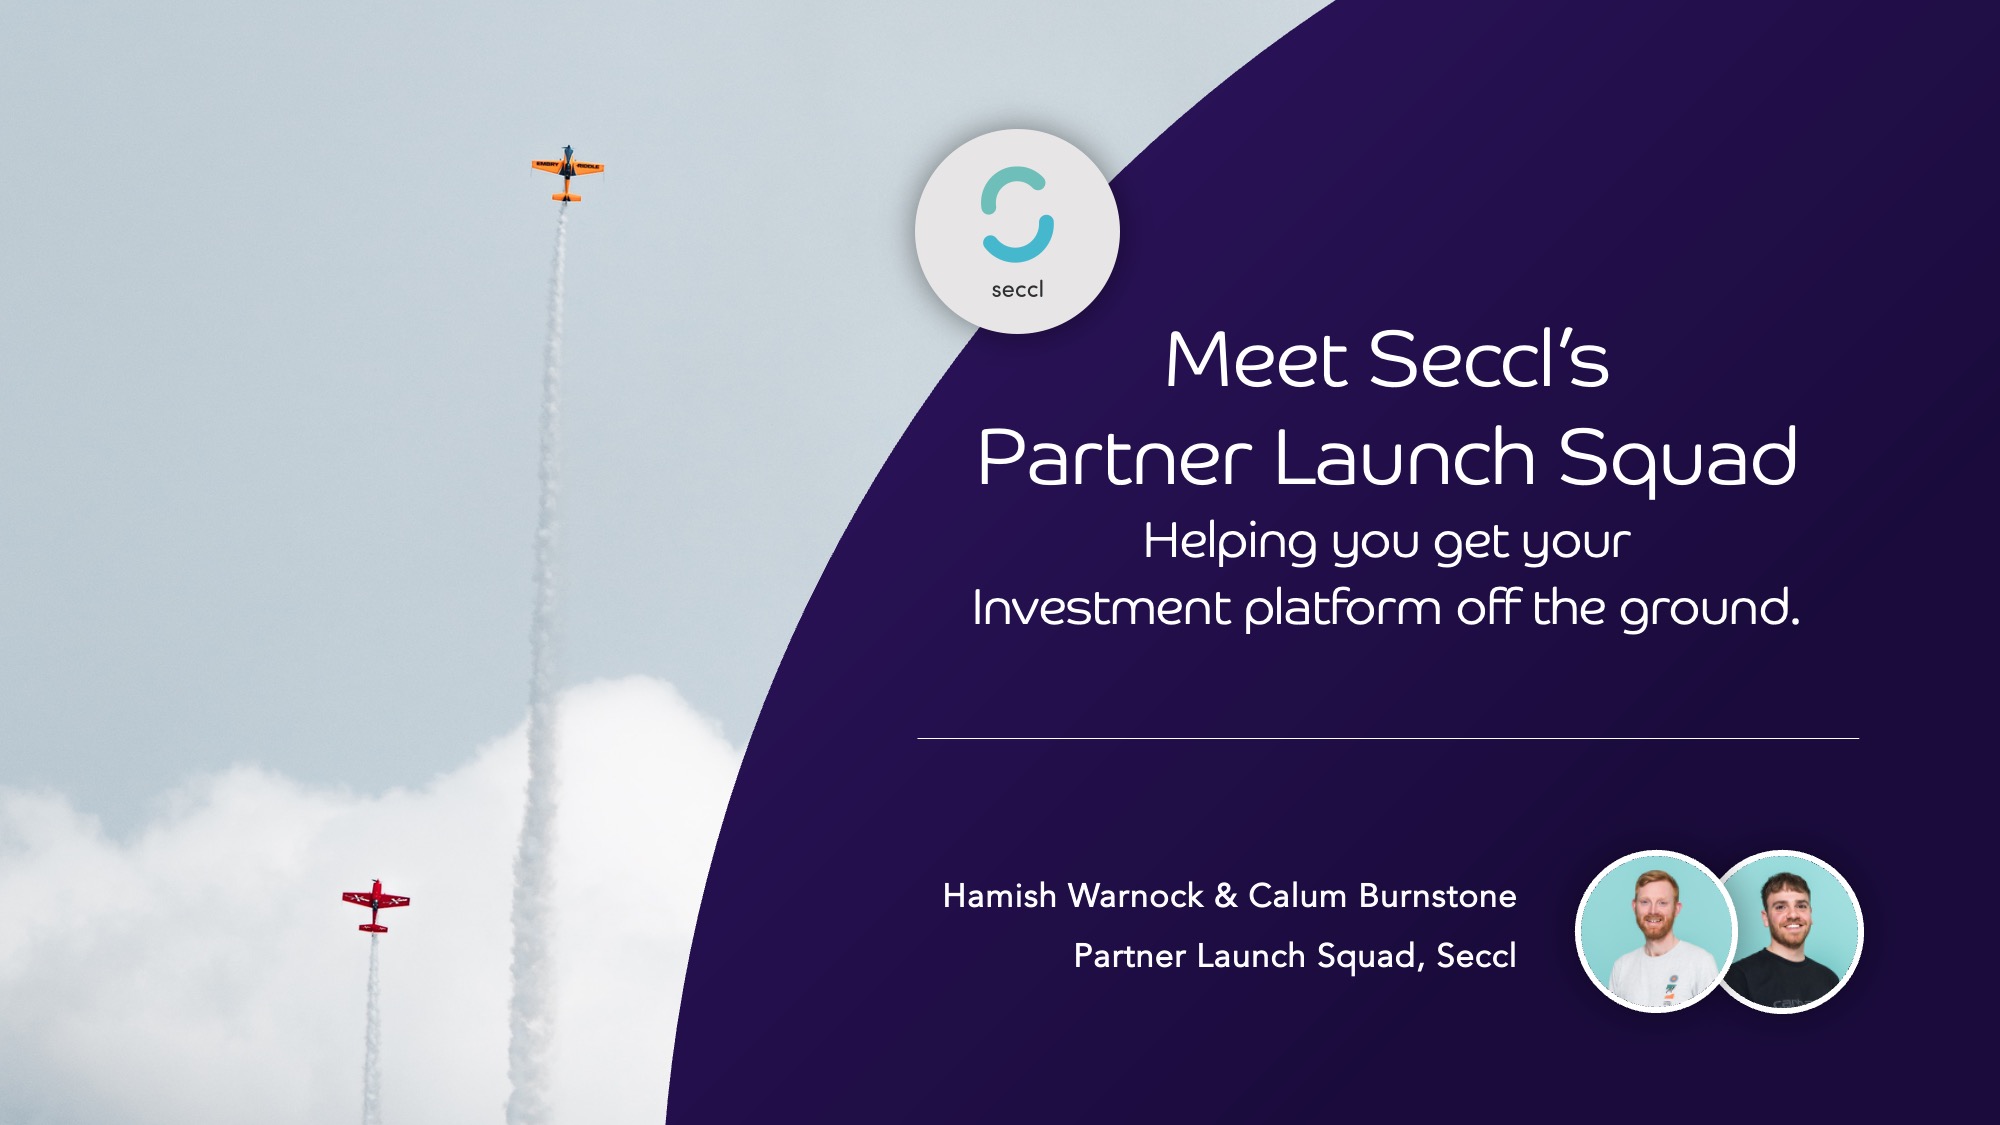 Meet Seccl’s Partner Launch Squad: helping you get your platform off the ground